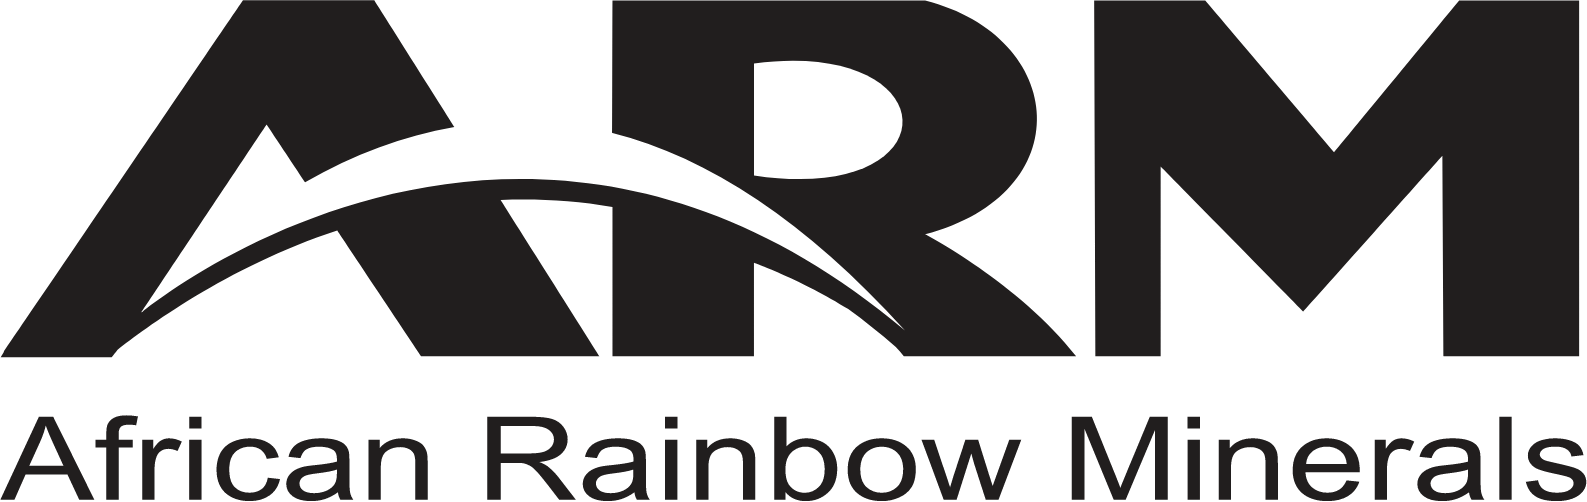 African Rainbow Minerals logo large (transparent PNG)